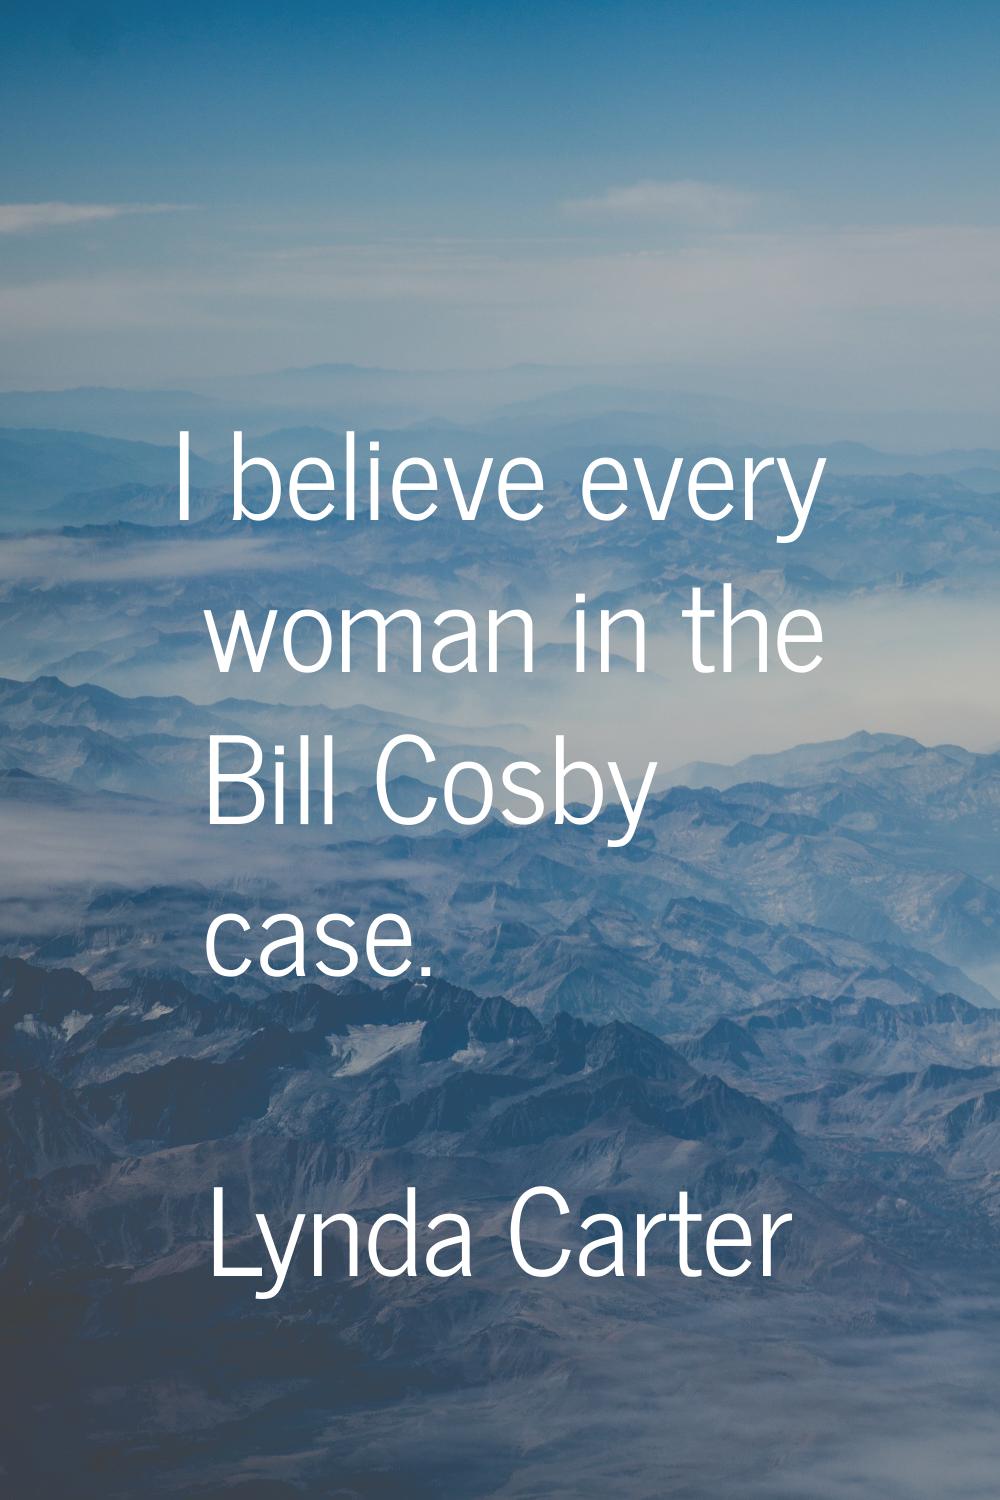 I believe every woman in the Bill Cosby case.